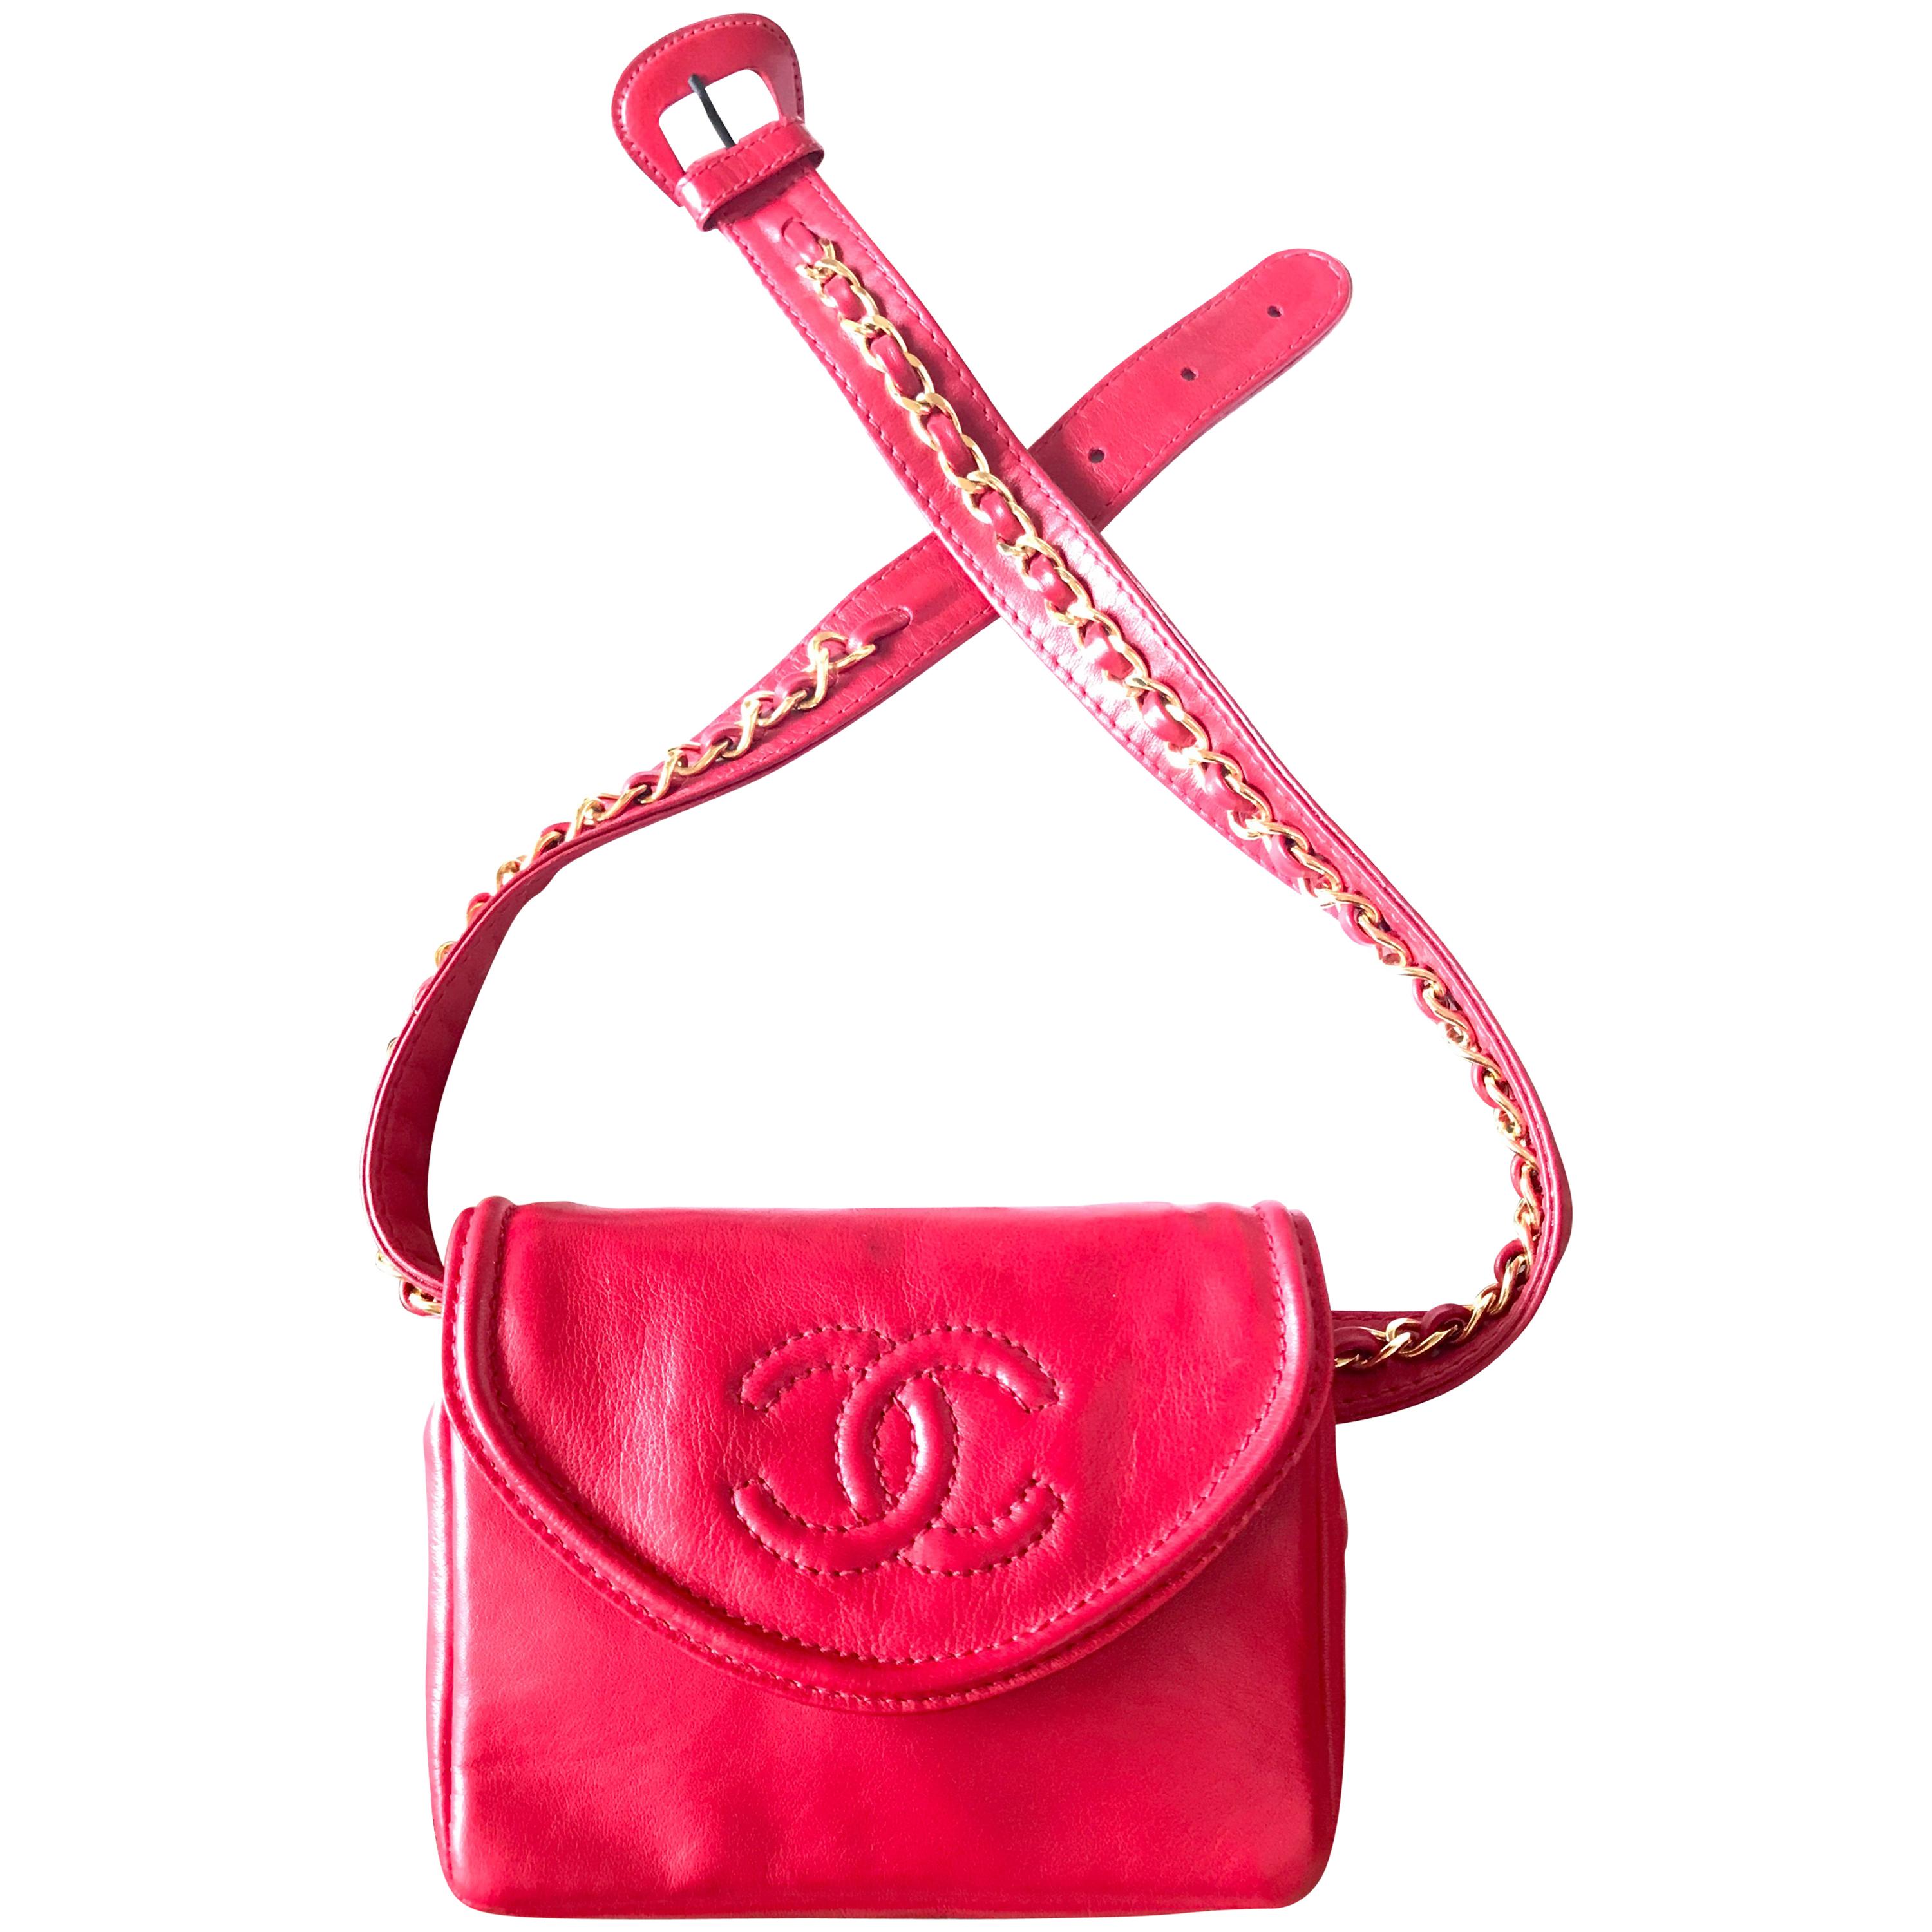 Chanel Vintage red leather belt bag / fanny pack with CC stitch mark and chains For Sale